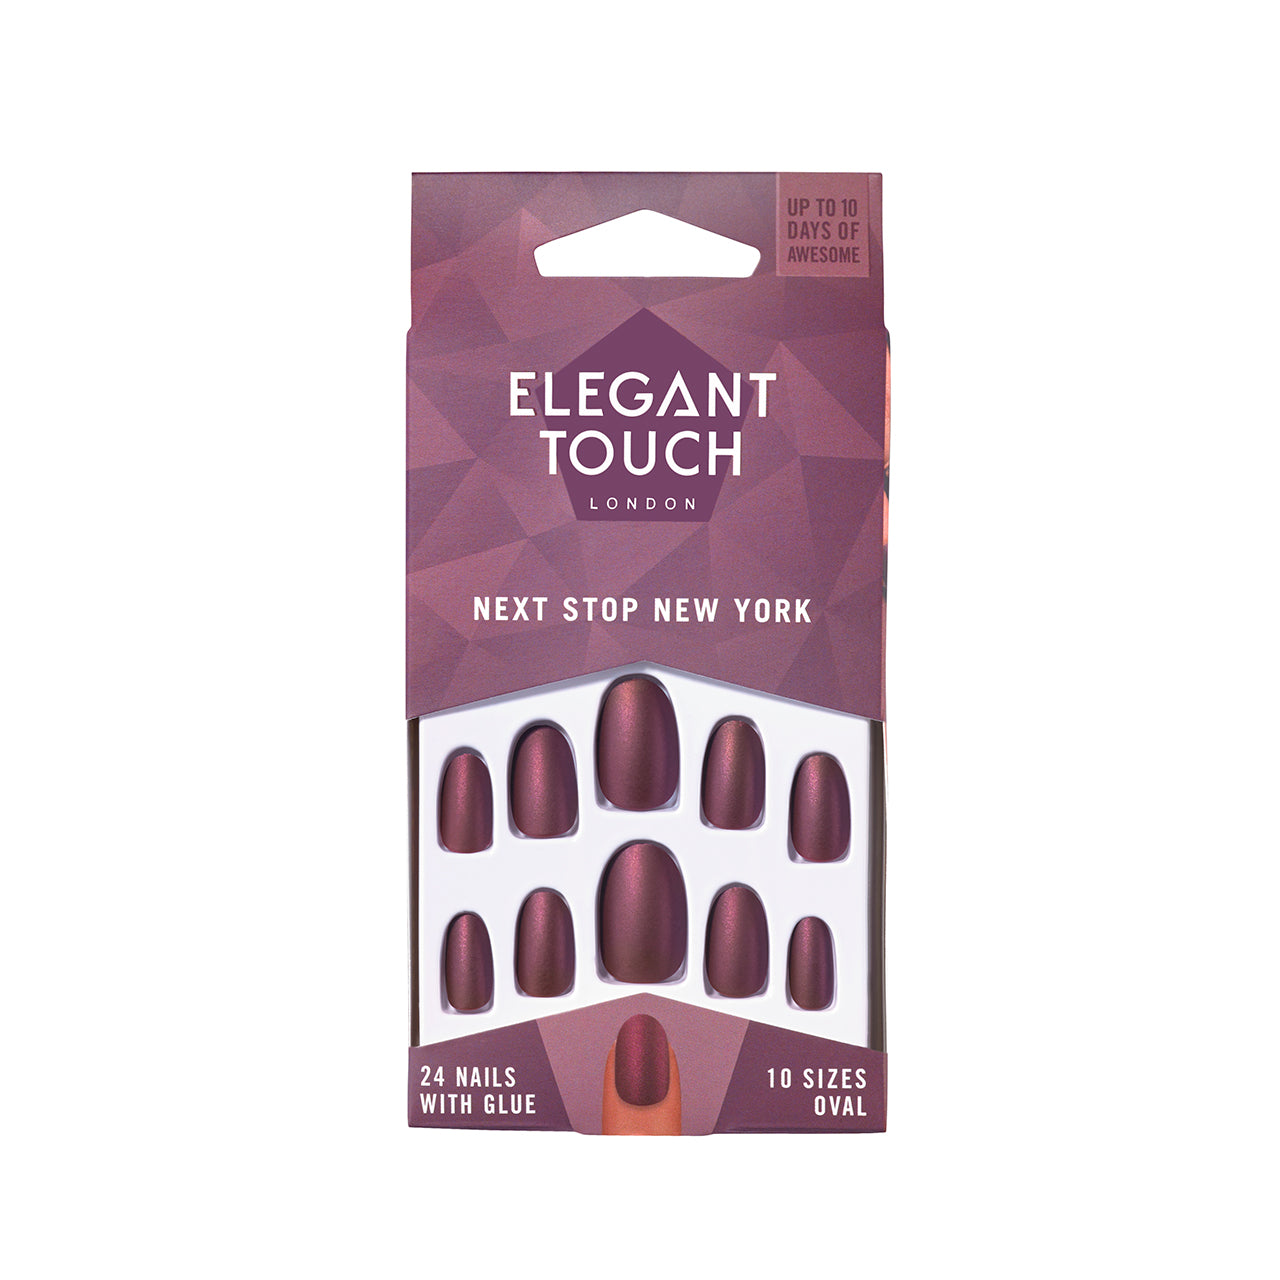 Elegant Touch Nails The Destination Collection - Next Stop New York